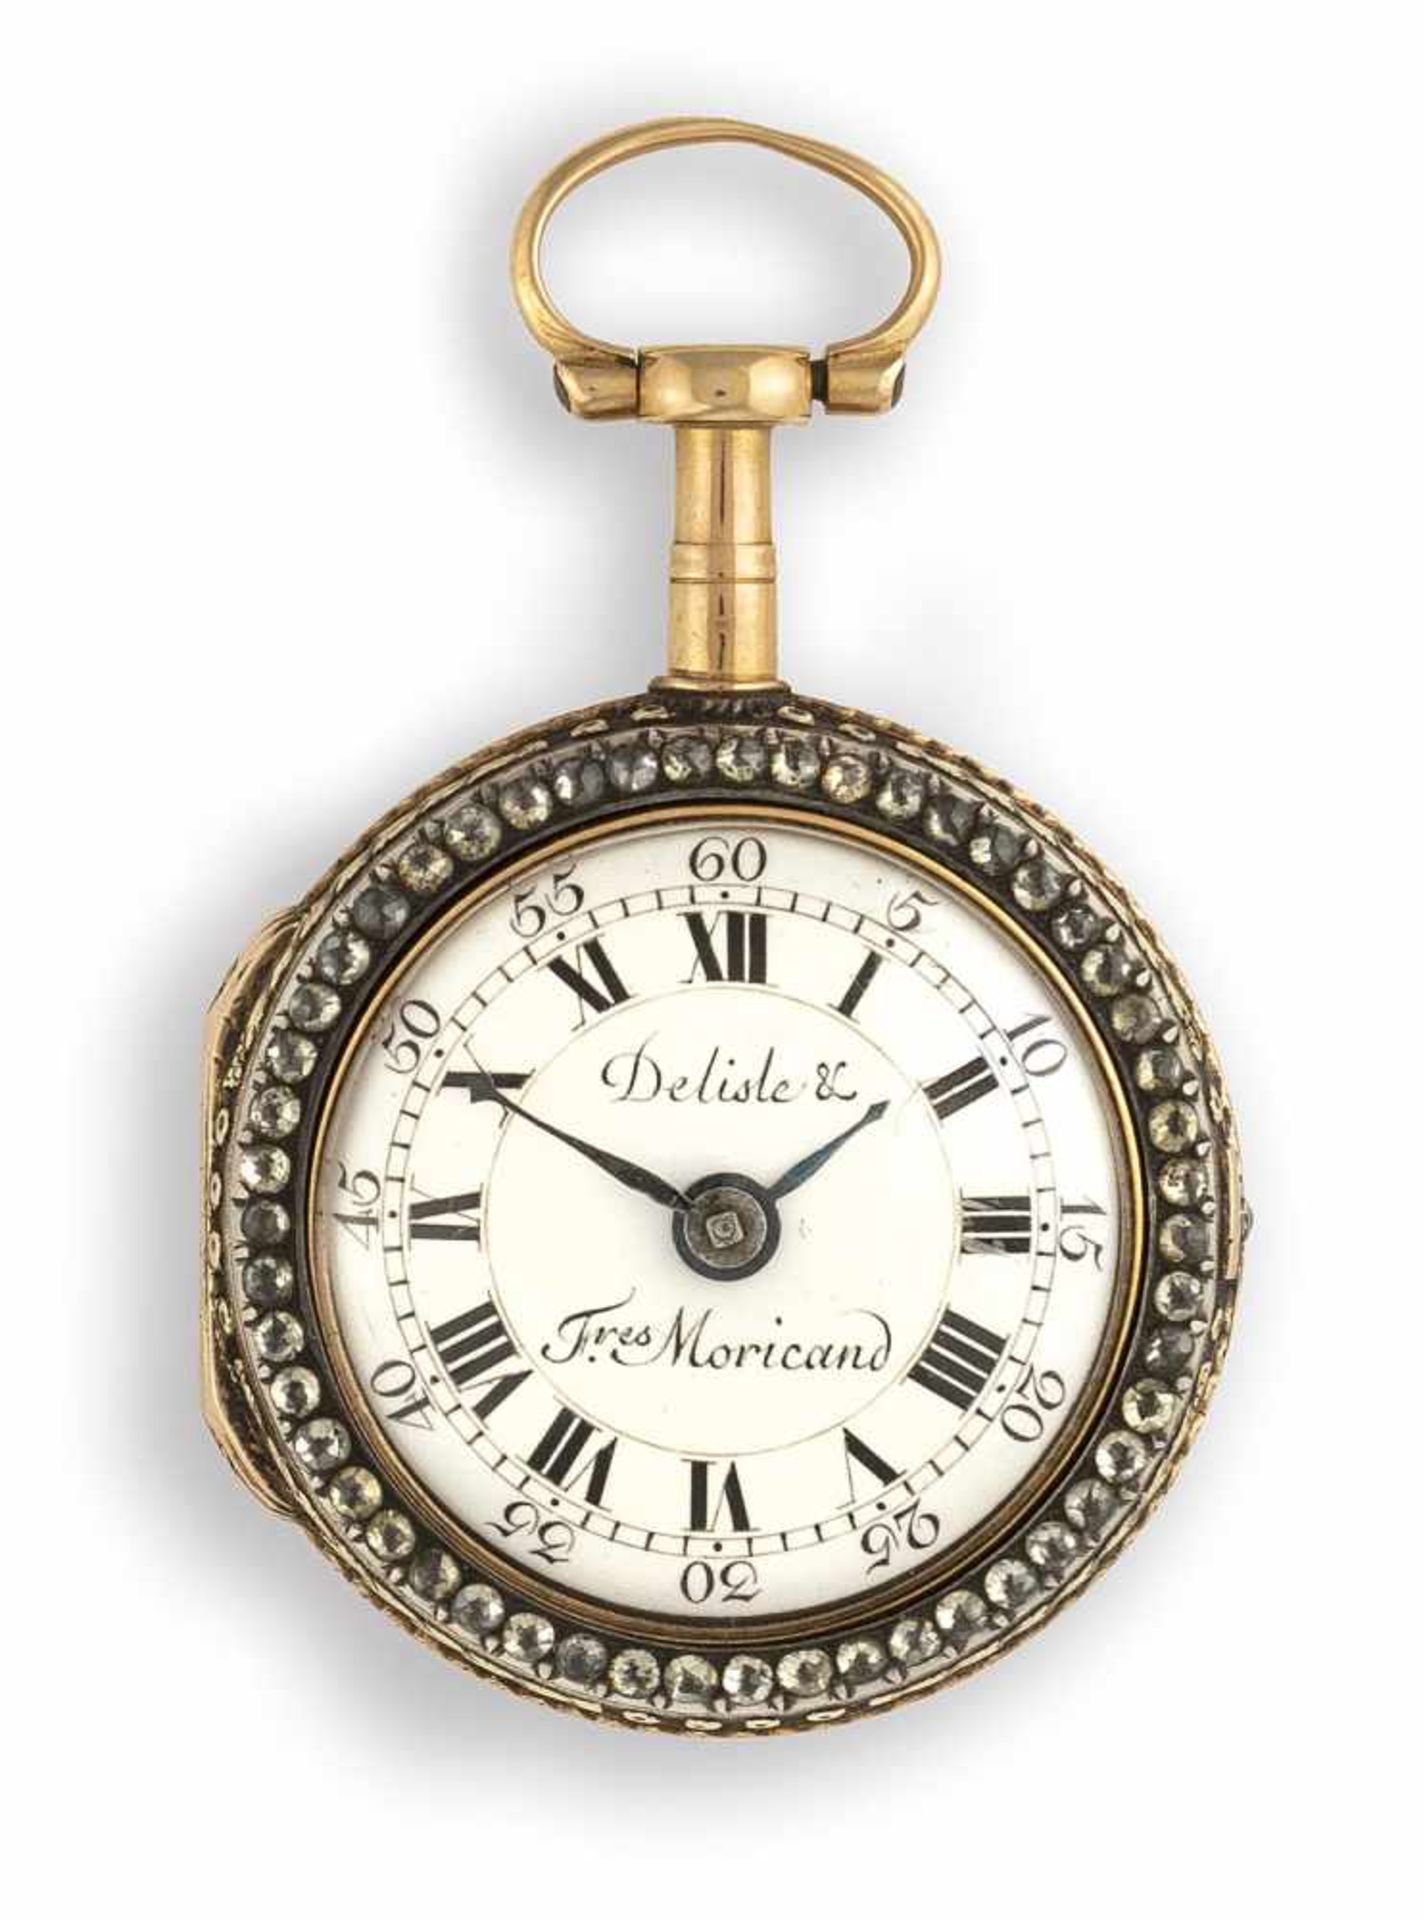 A fine gold ladies watch, signed Delisle & Freres Moricand, Geneva, 19th ct. Enamel decorated